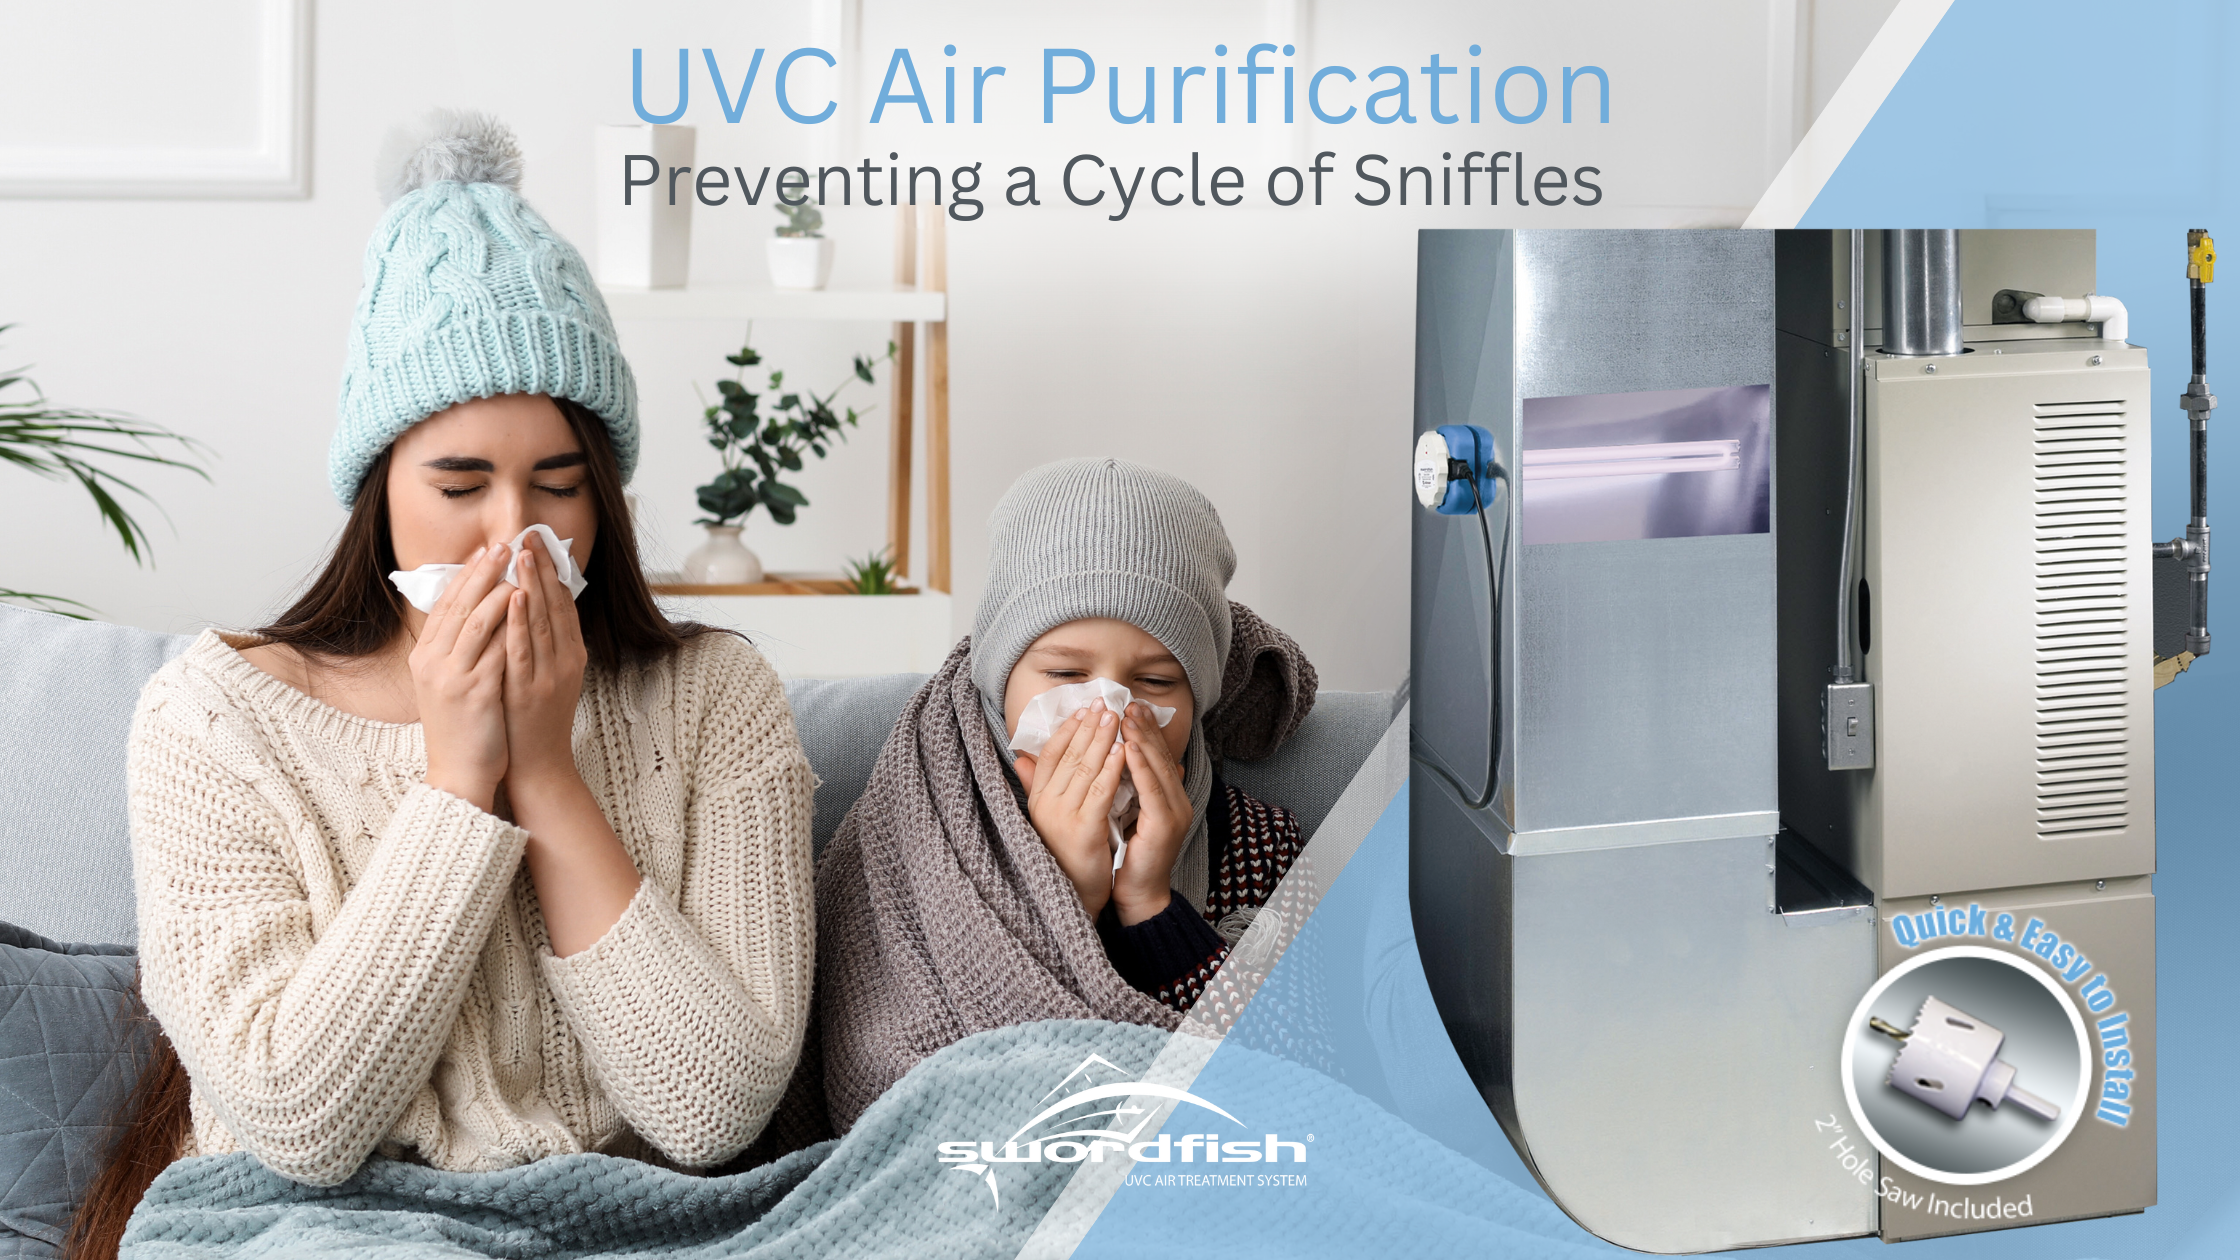 Swordfish UVC Air Purification Helps Prevent a Cycle of Sniffles